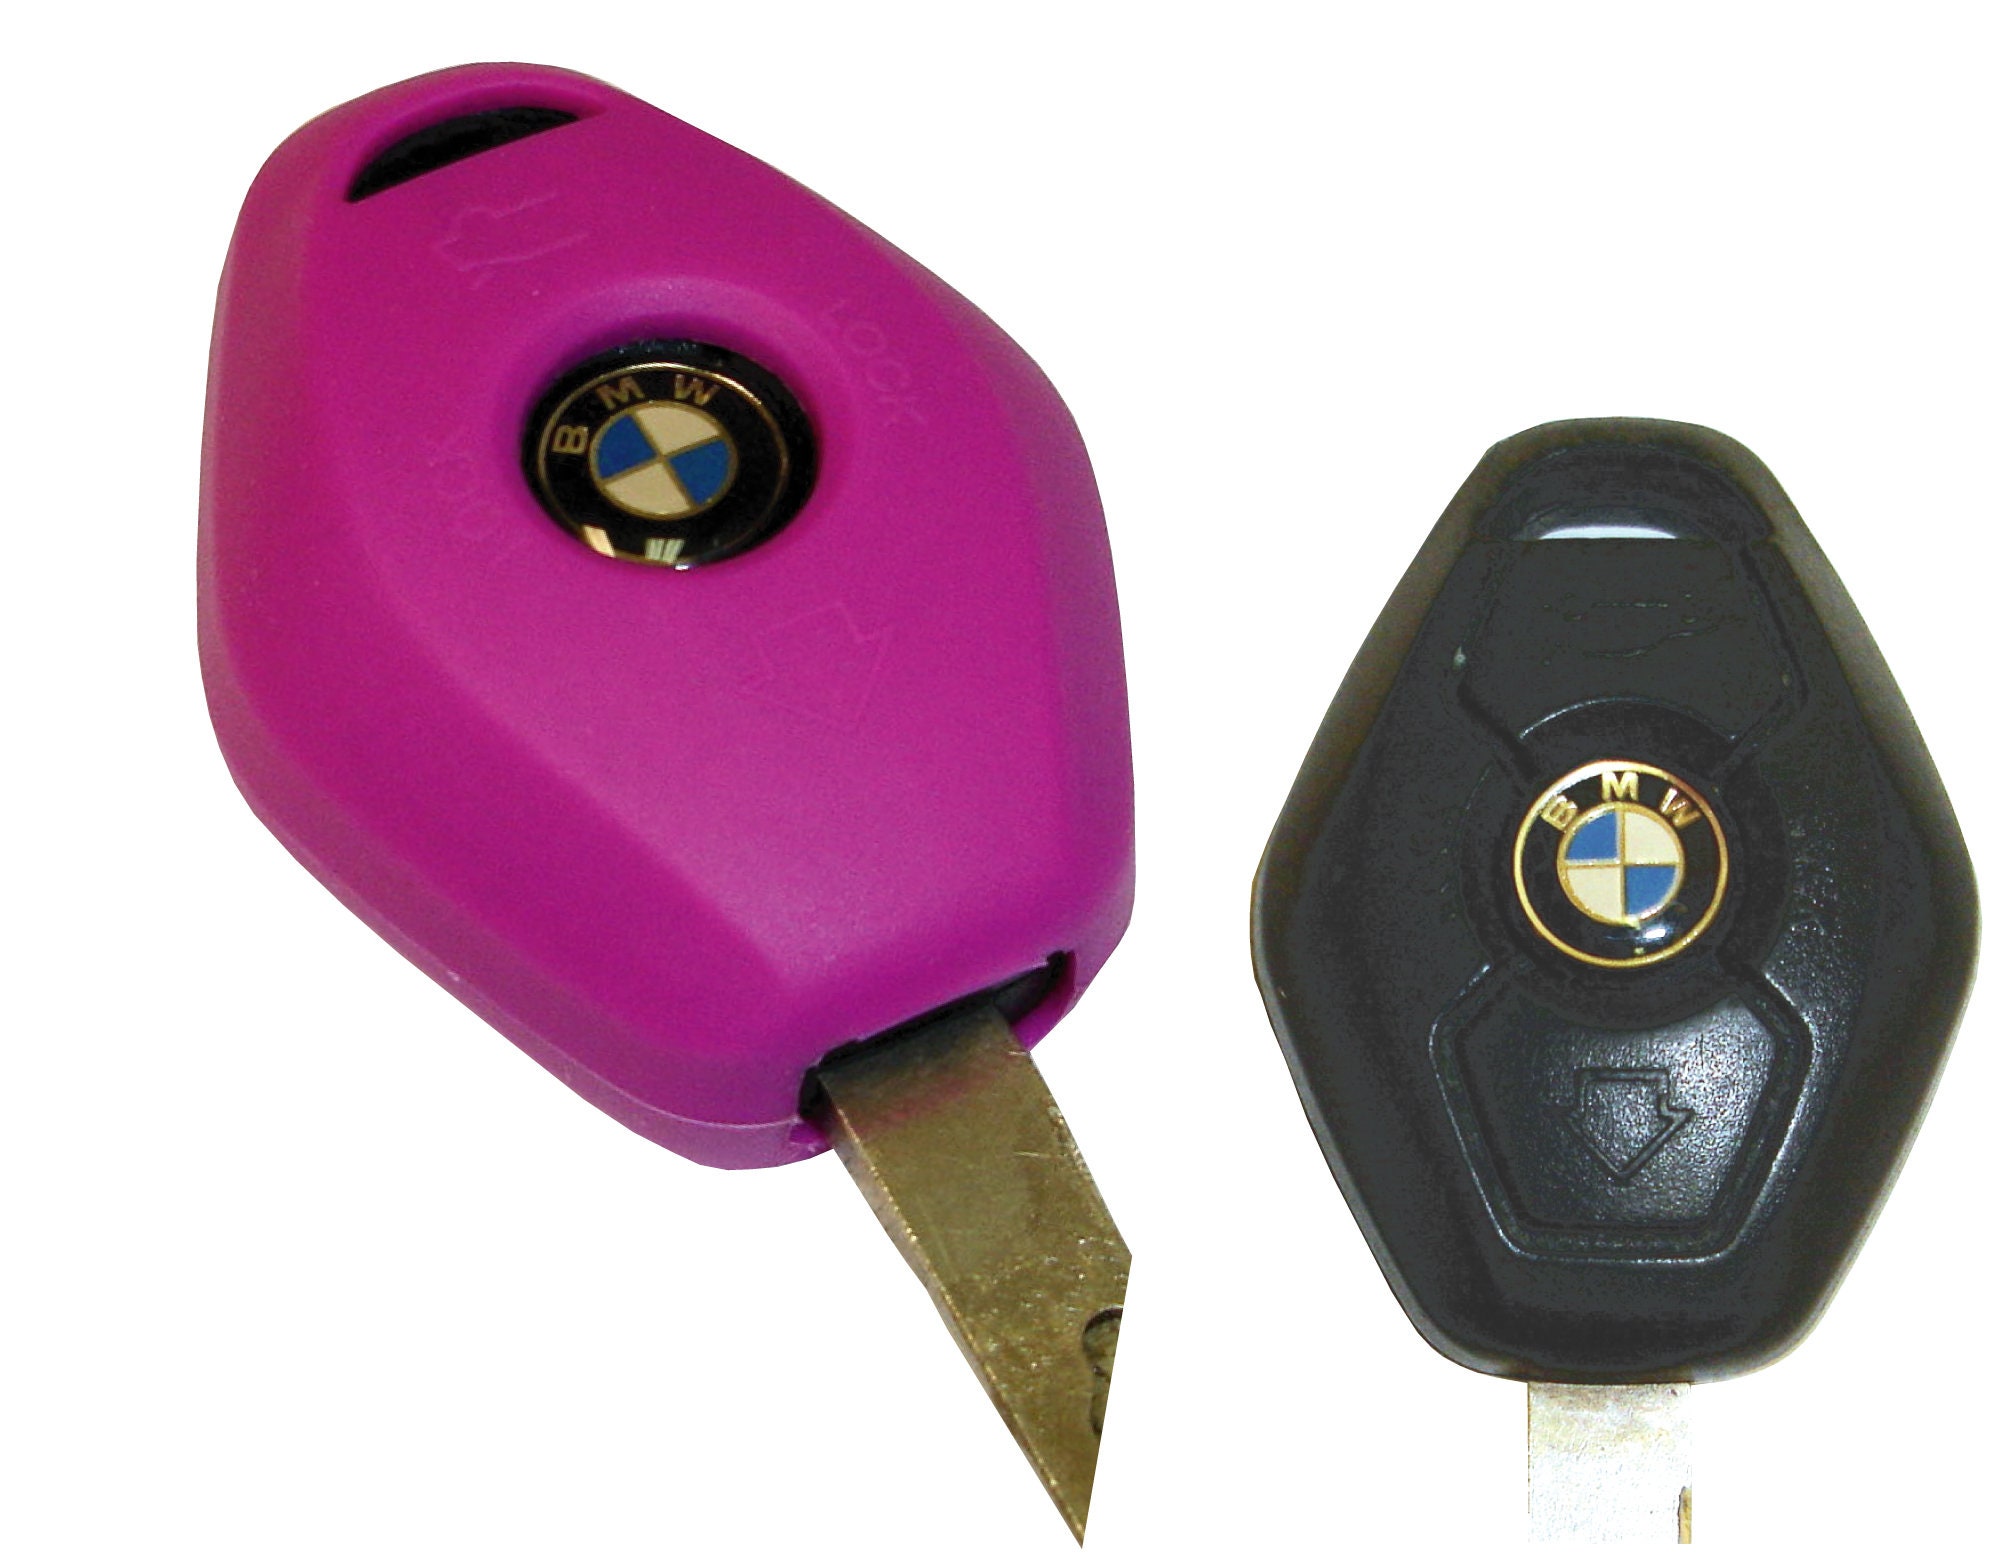 Purple TPU key case remote control cover protection for BMW 7 Series 5  display k